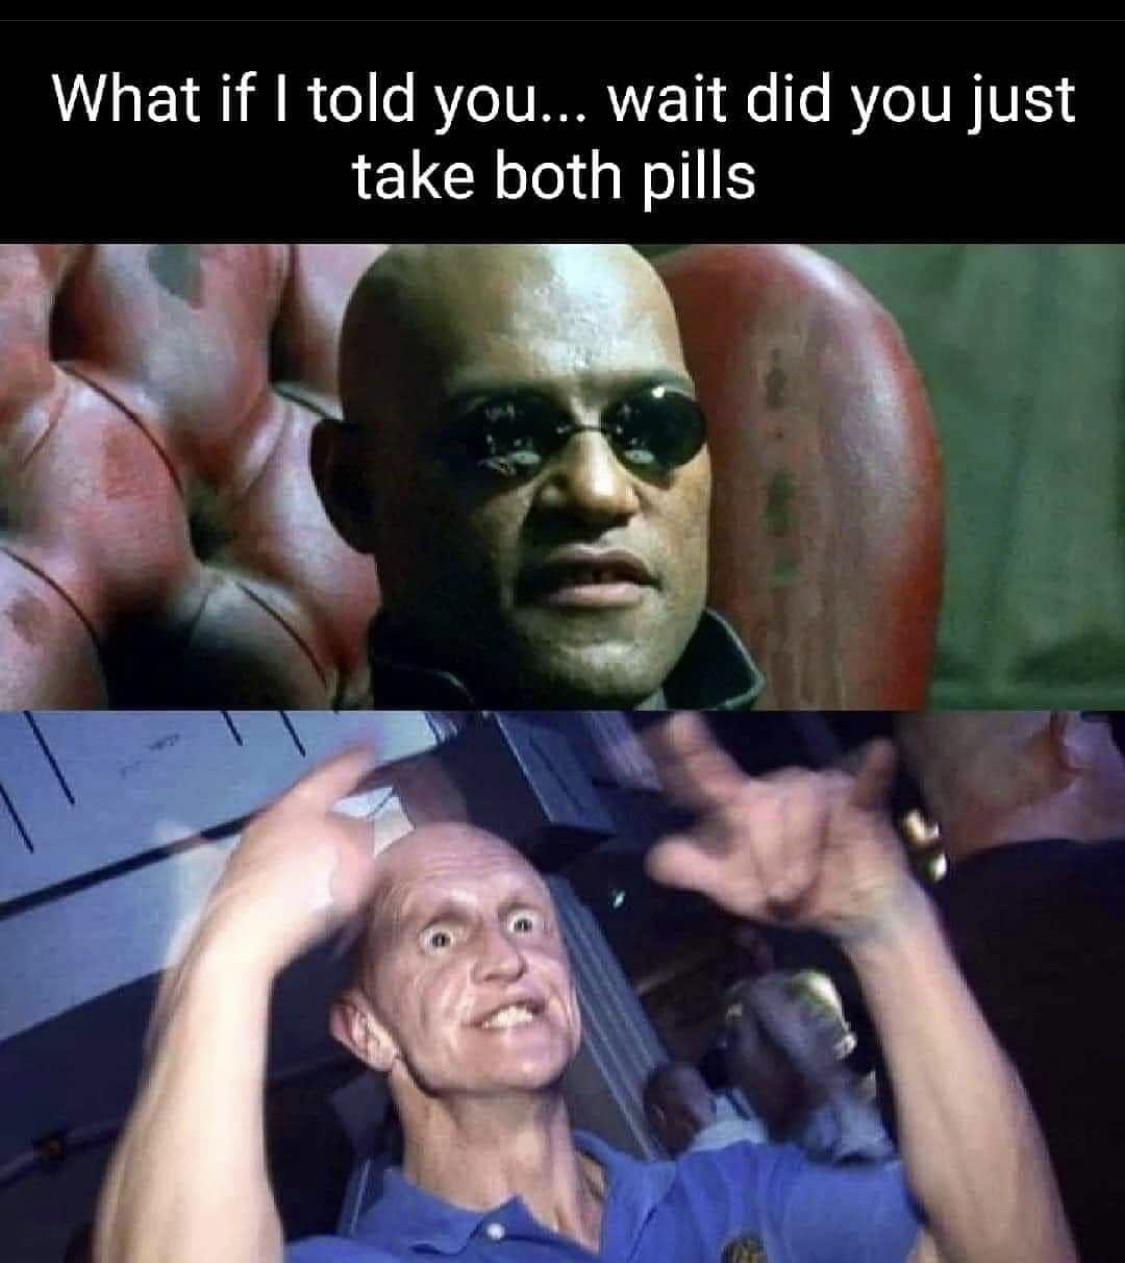 shaun jackson - What if I told you... Wait did you just take both pills